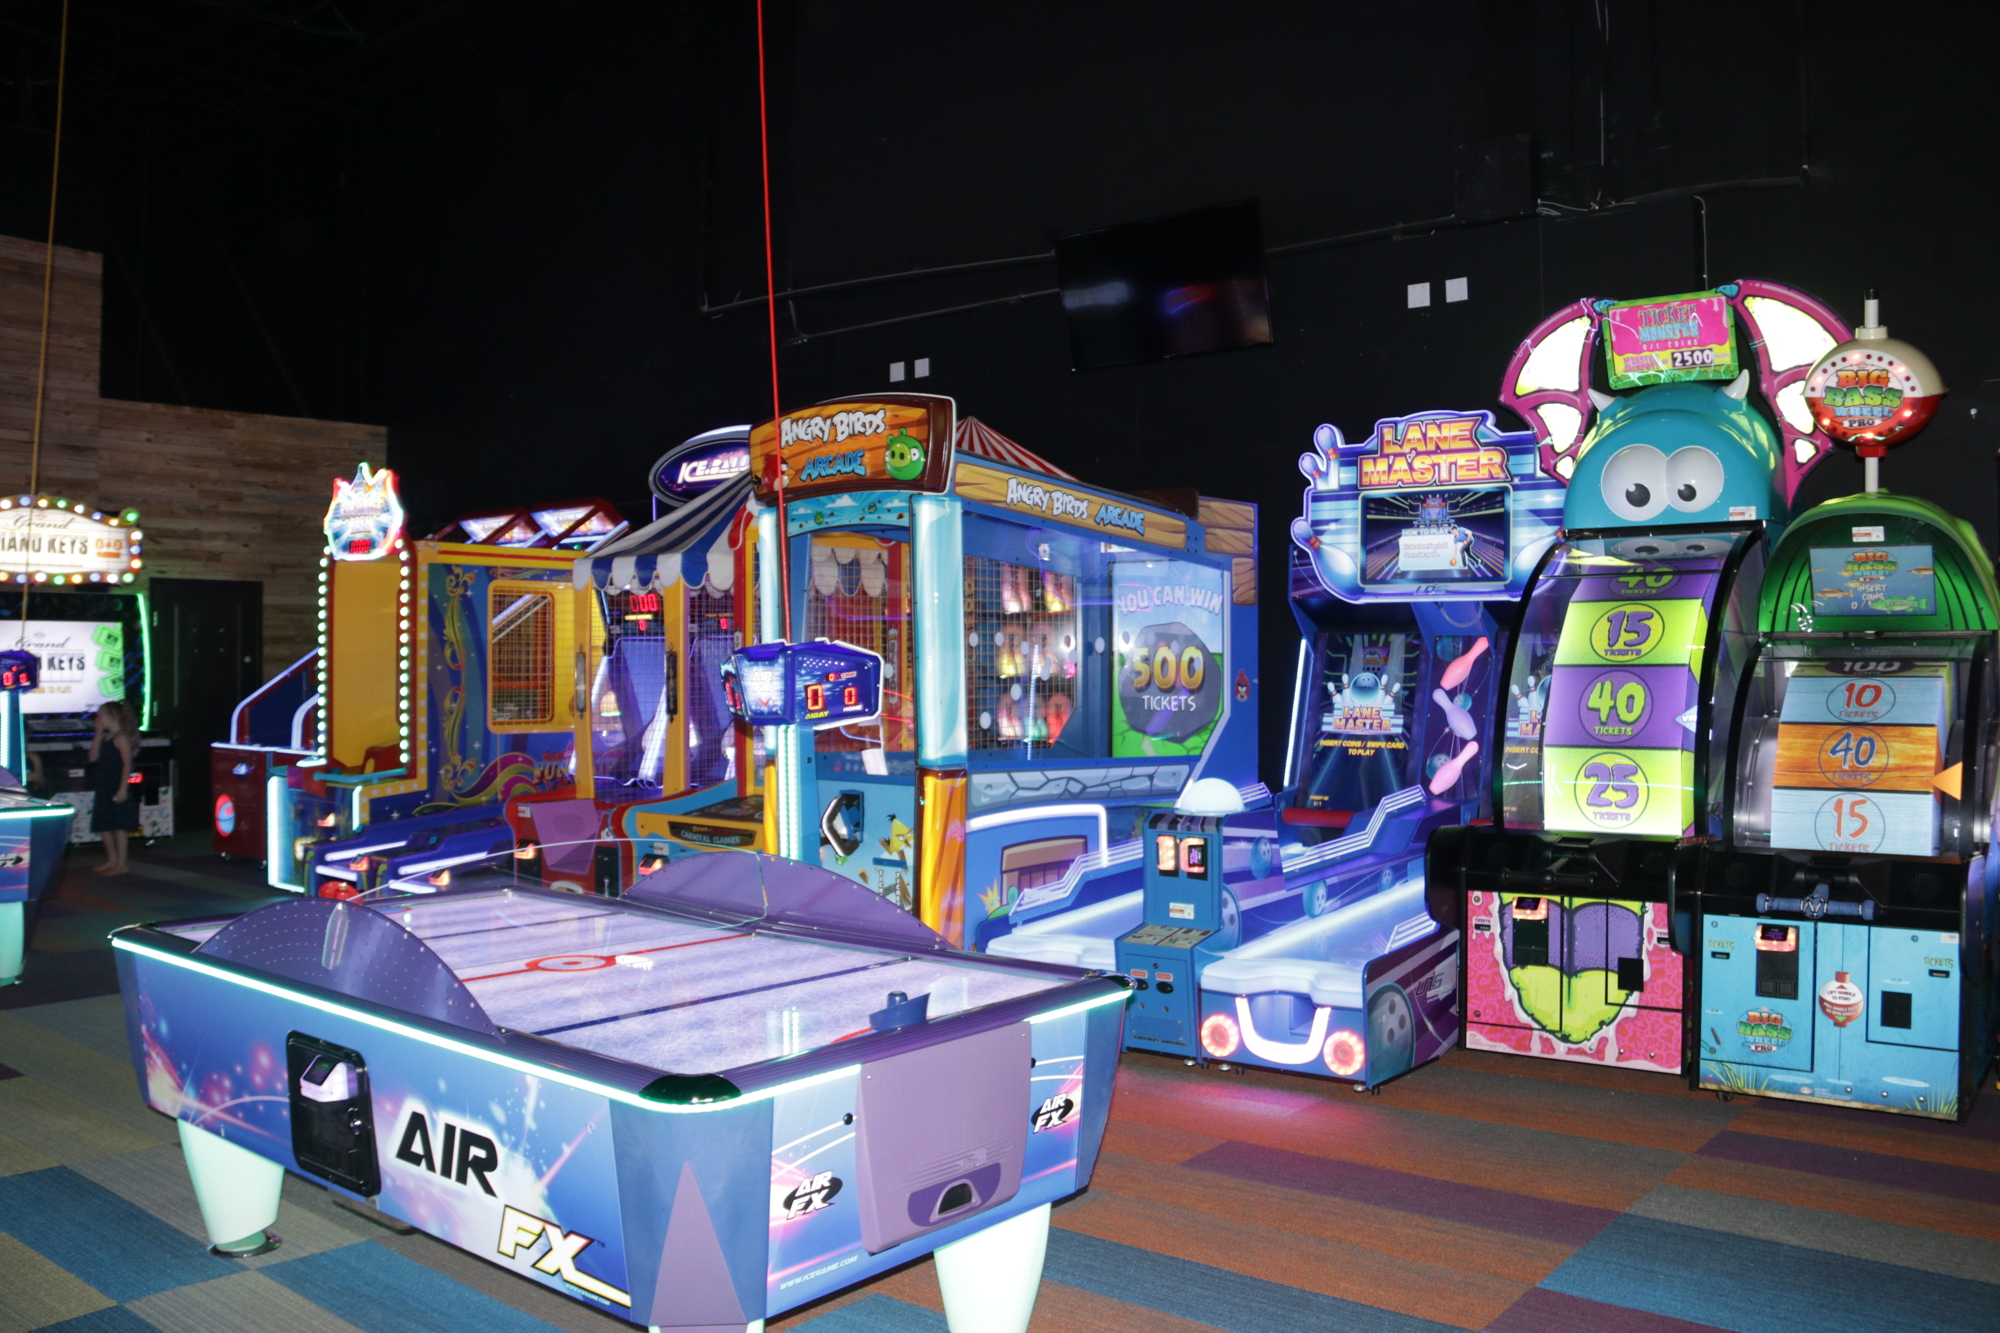 A key feature at the Groovy Goat is the arcade, which feature more than 40 different games.